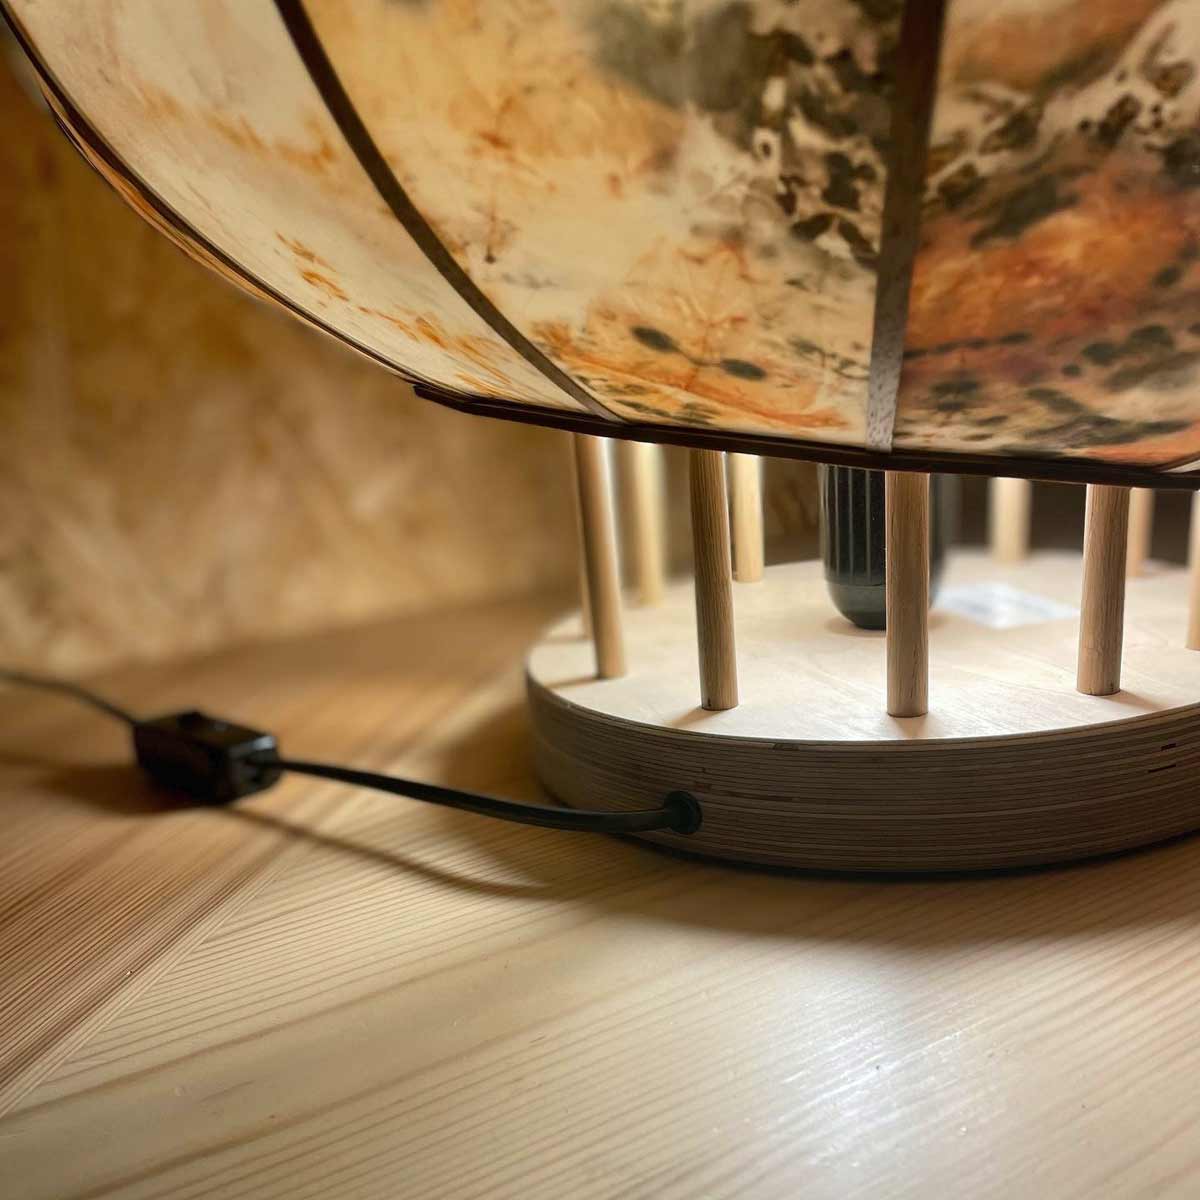 Artistic table lamp made from natural materials sold by South Charlotte Fine Lighting